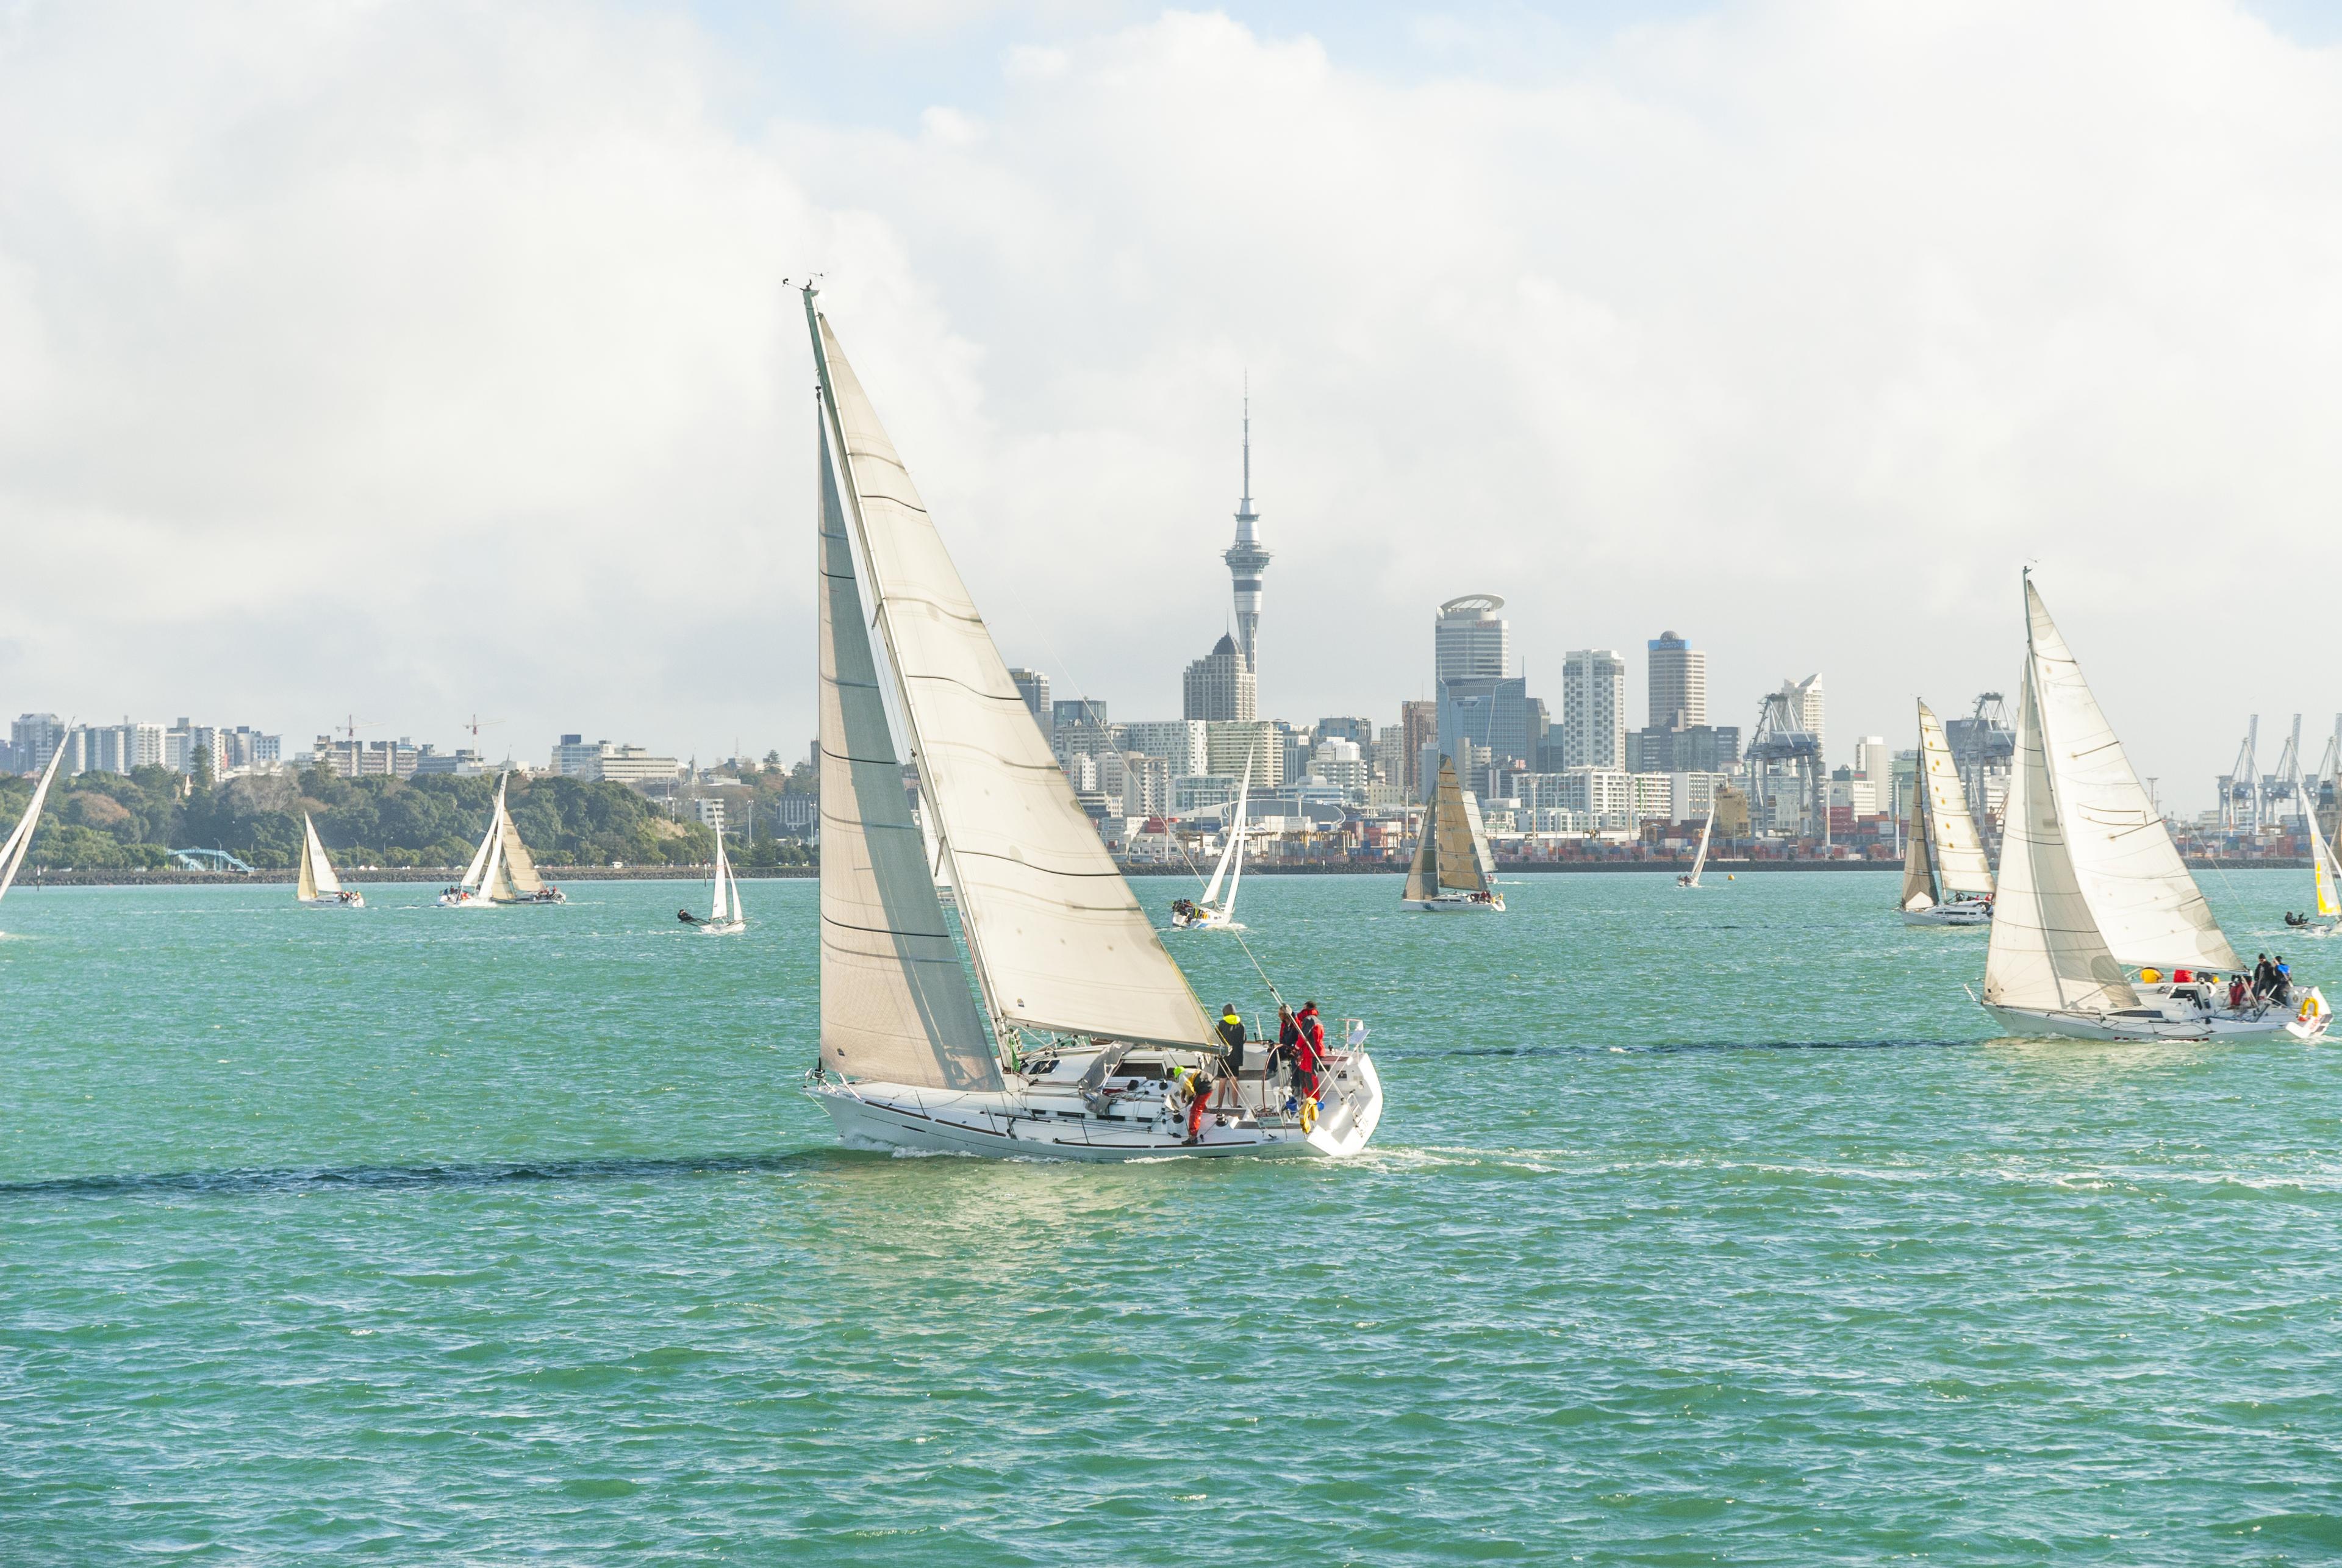 About Auckland